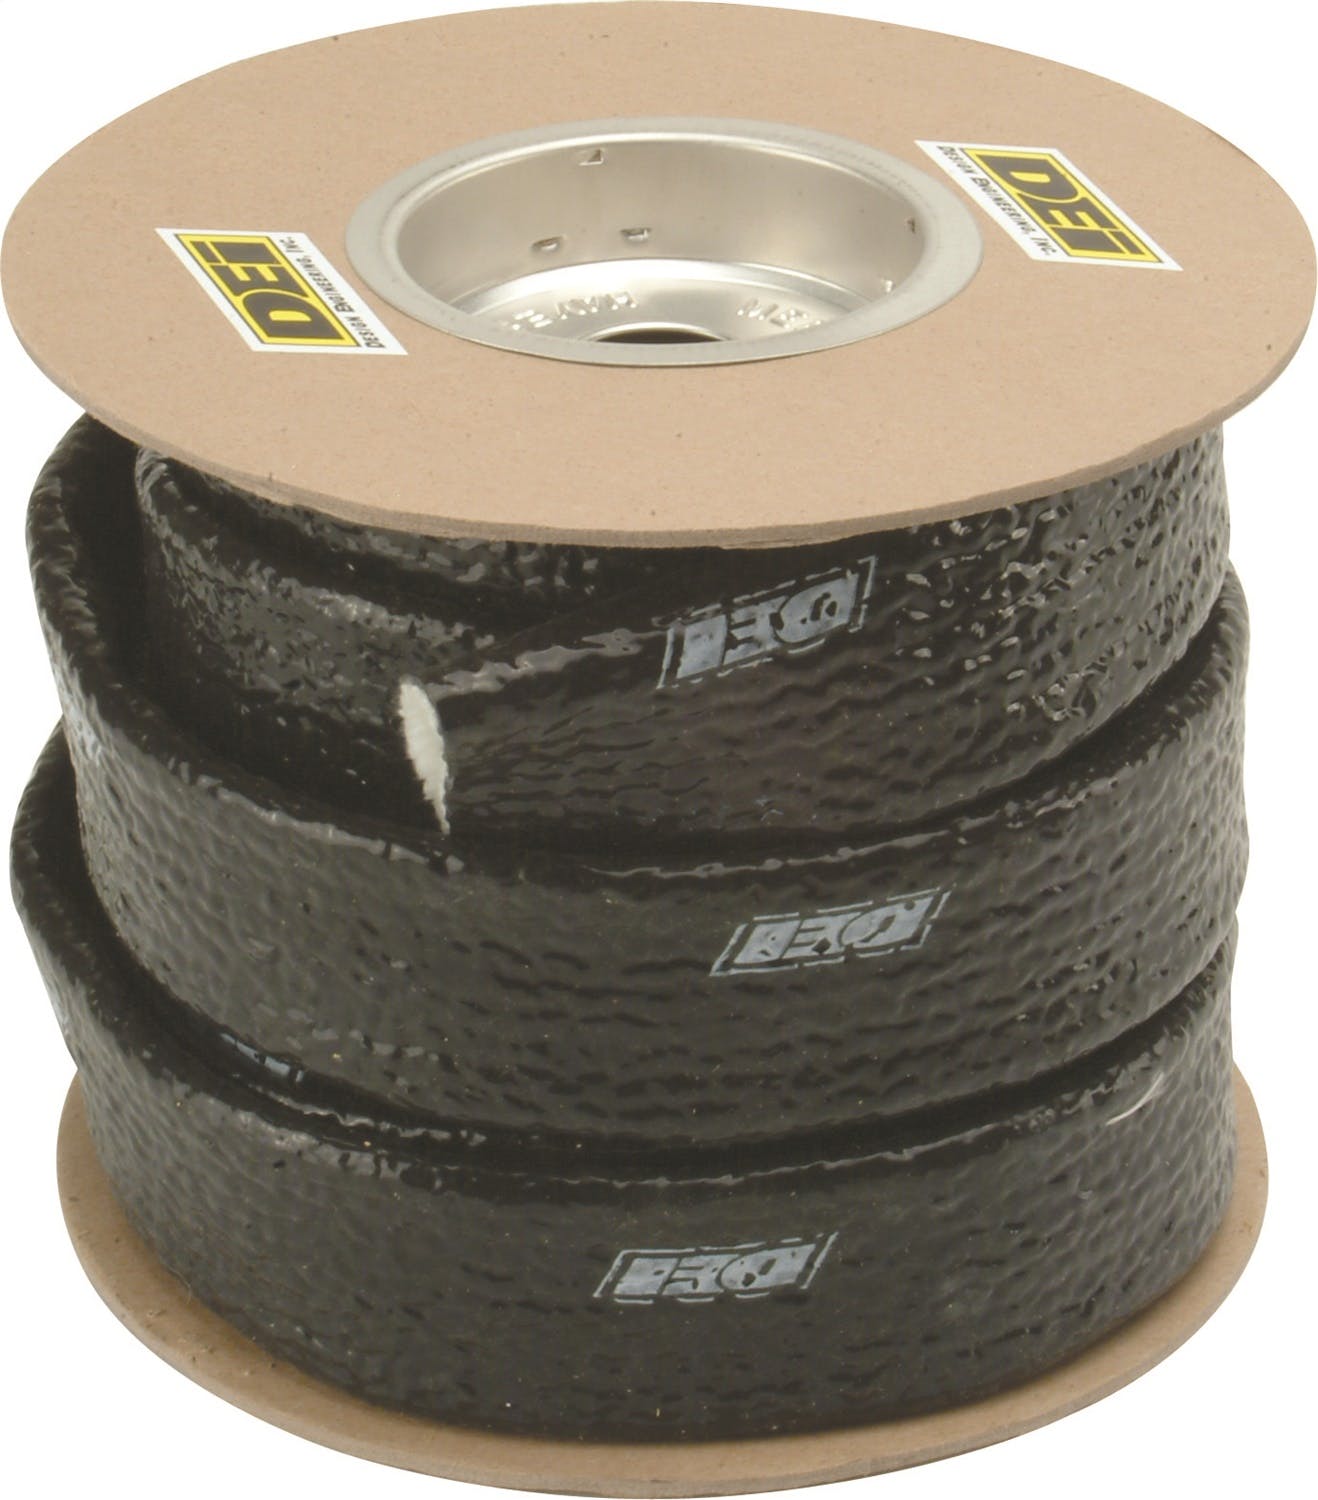 Design Engineering, Inc. 92473 Fire Sleeve and Tape Kit - 3/4 I.D. x 25'